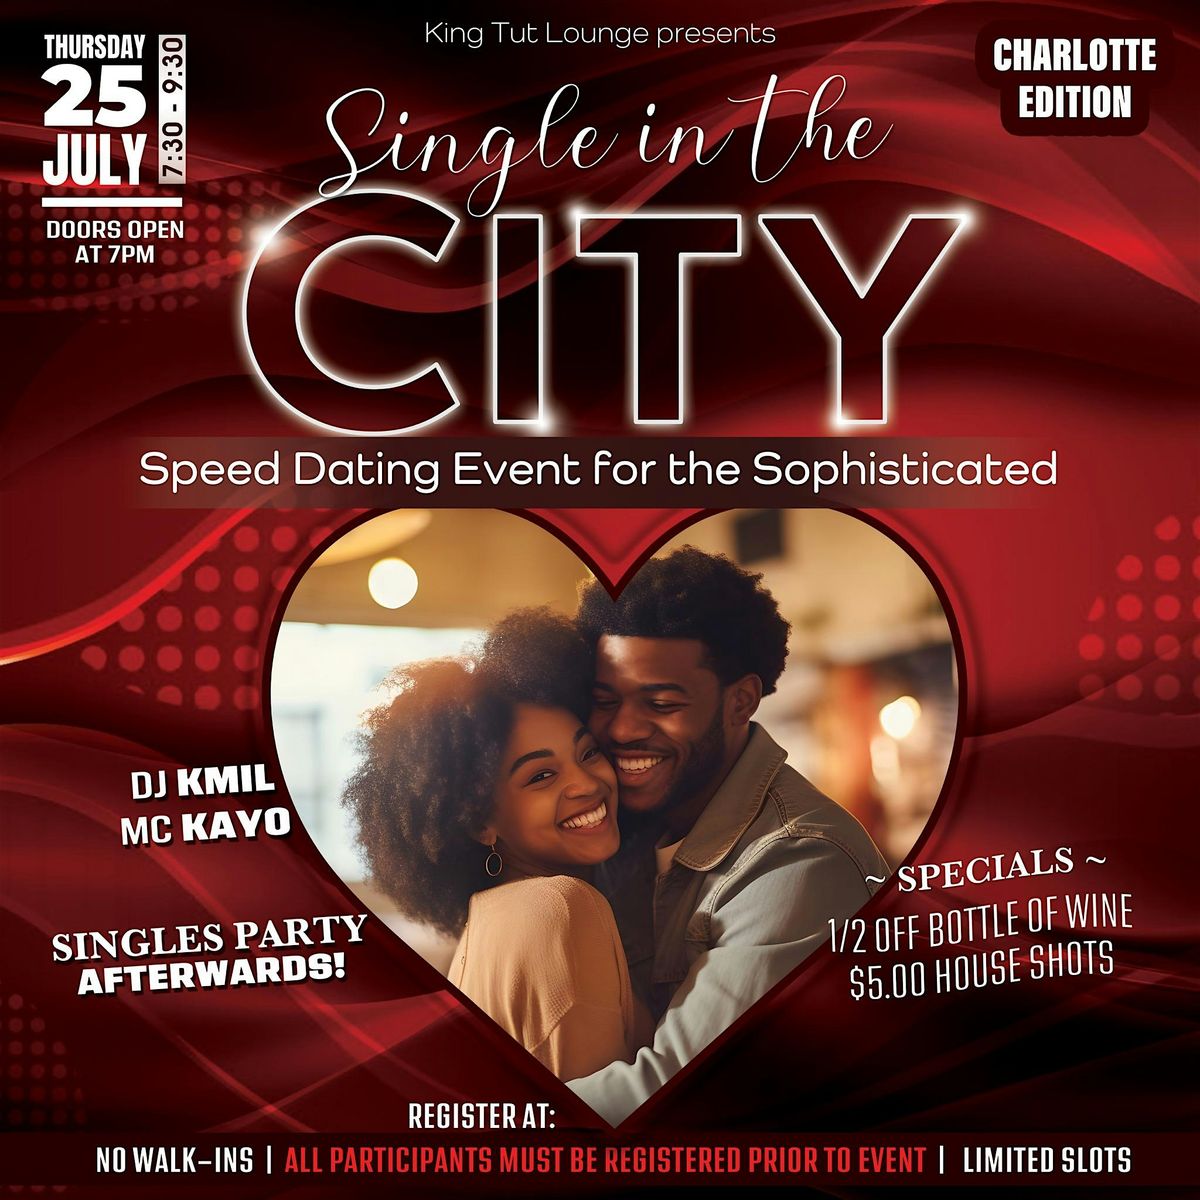 SINGLE IN THE CITY! : A Speed Dating Event for the Sophisticated!!